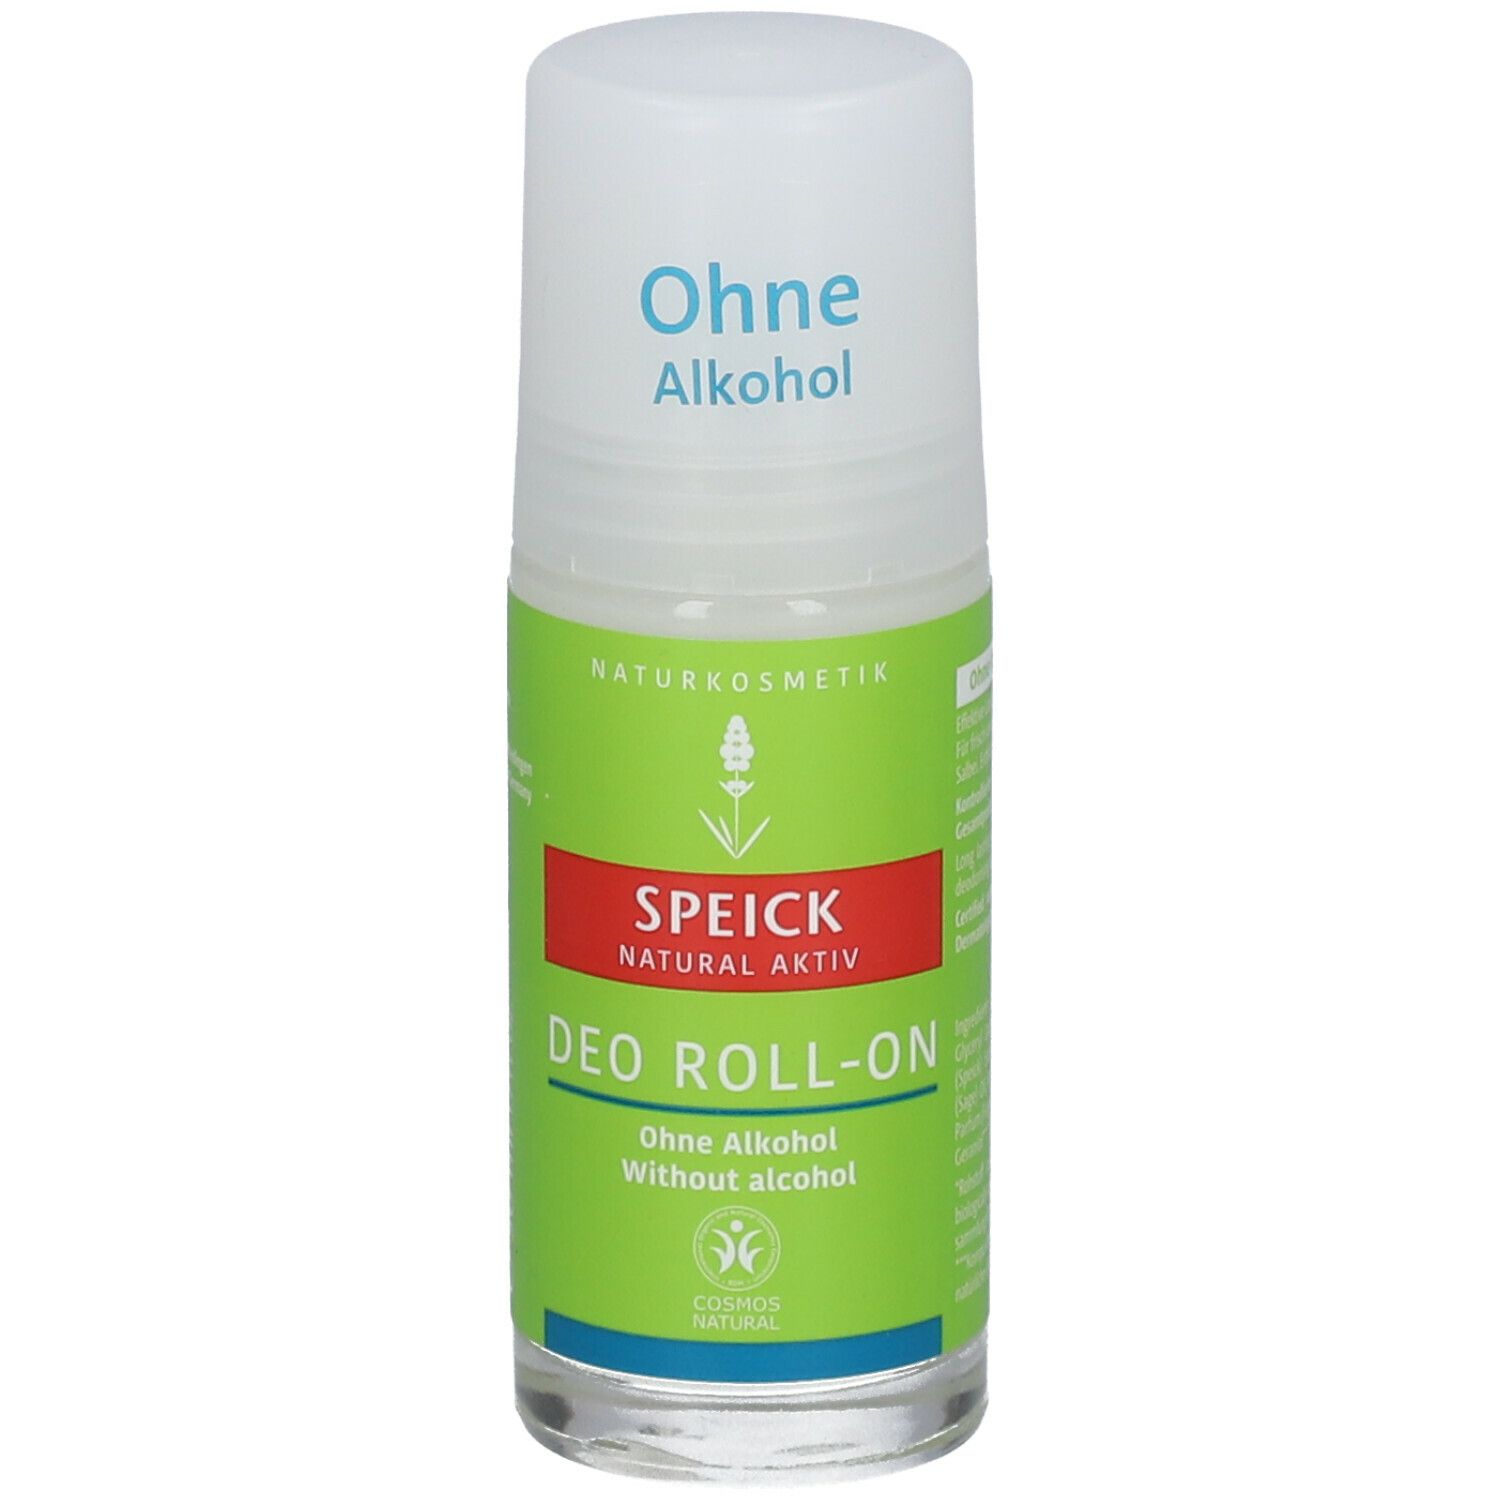 Speick natural Aktiv Deo Roll-On, Sans alcool